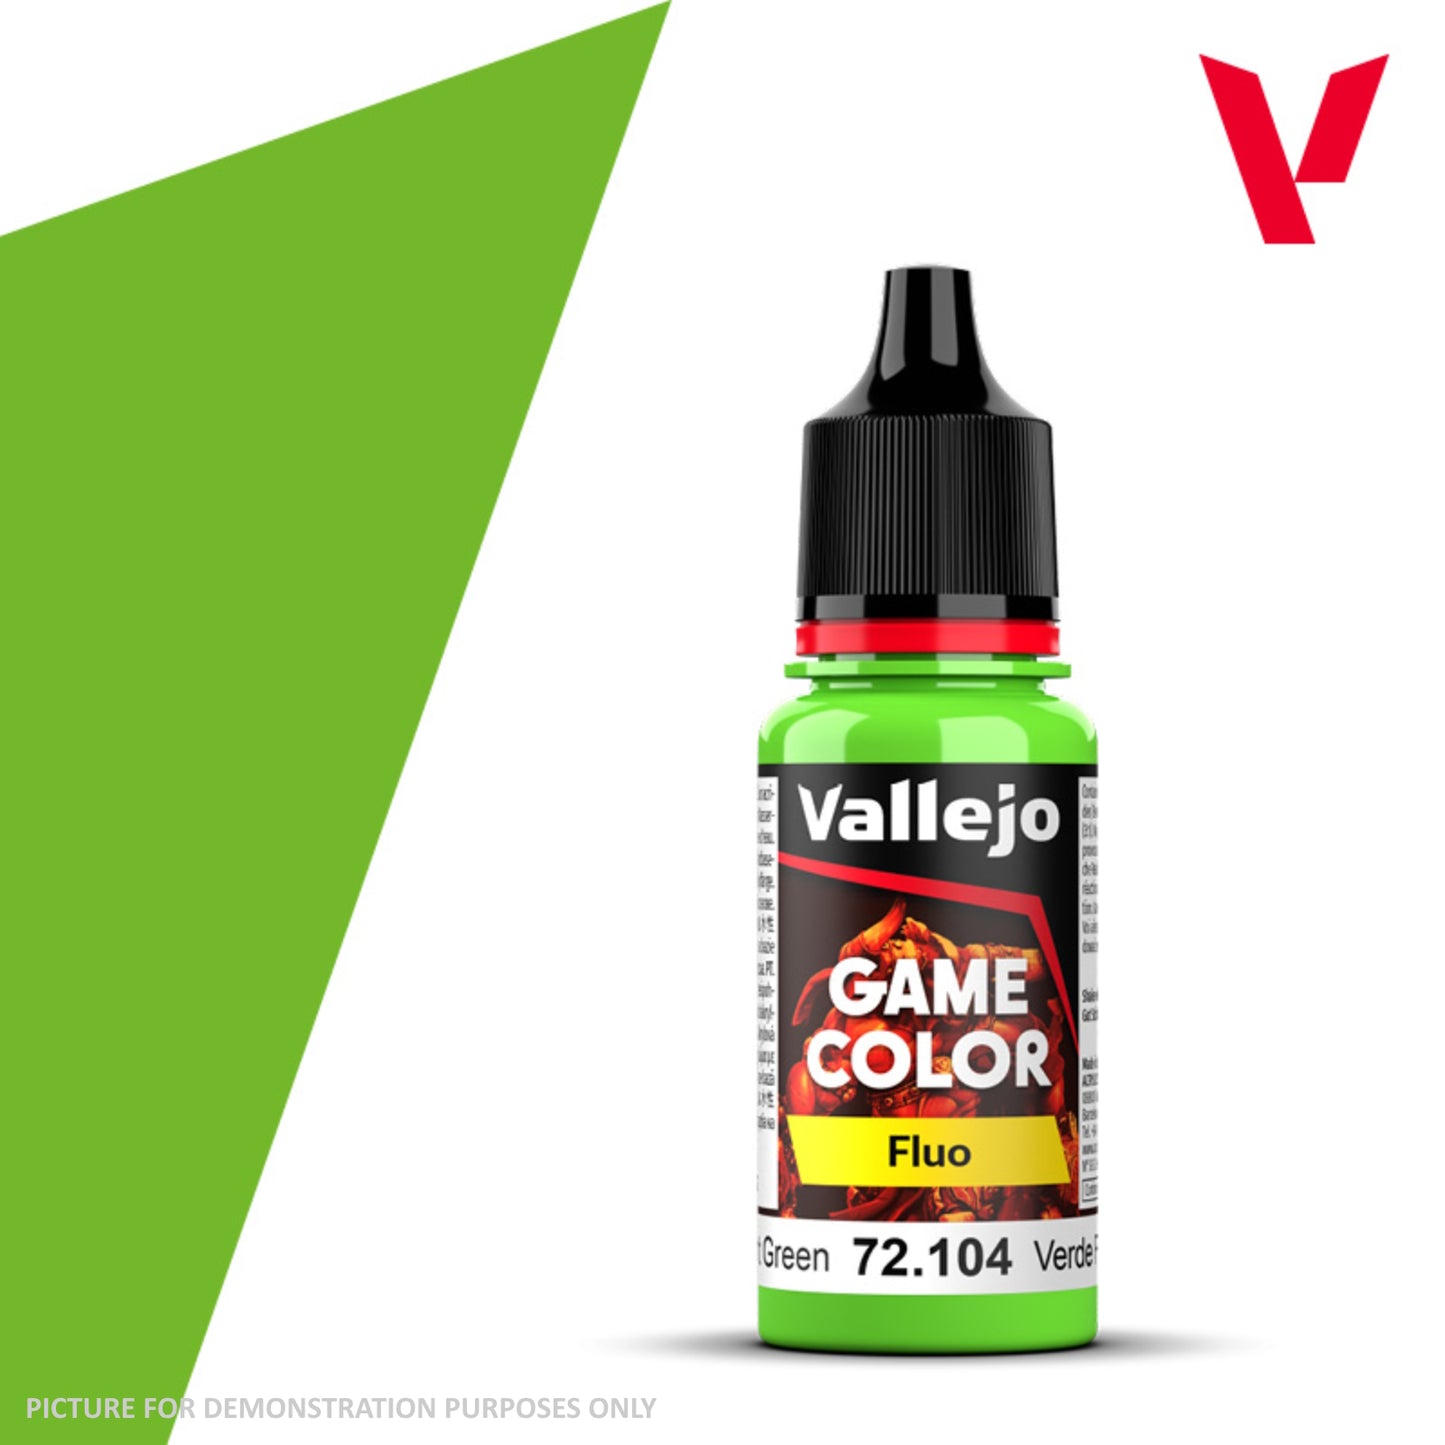 Vallejo Game Colour Fluo - 72.104 Green 18ml